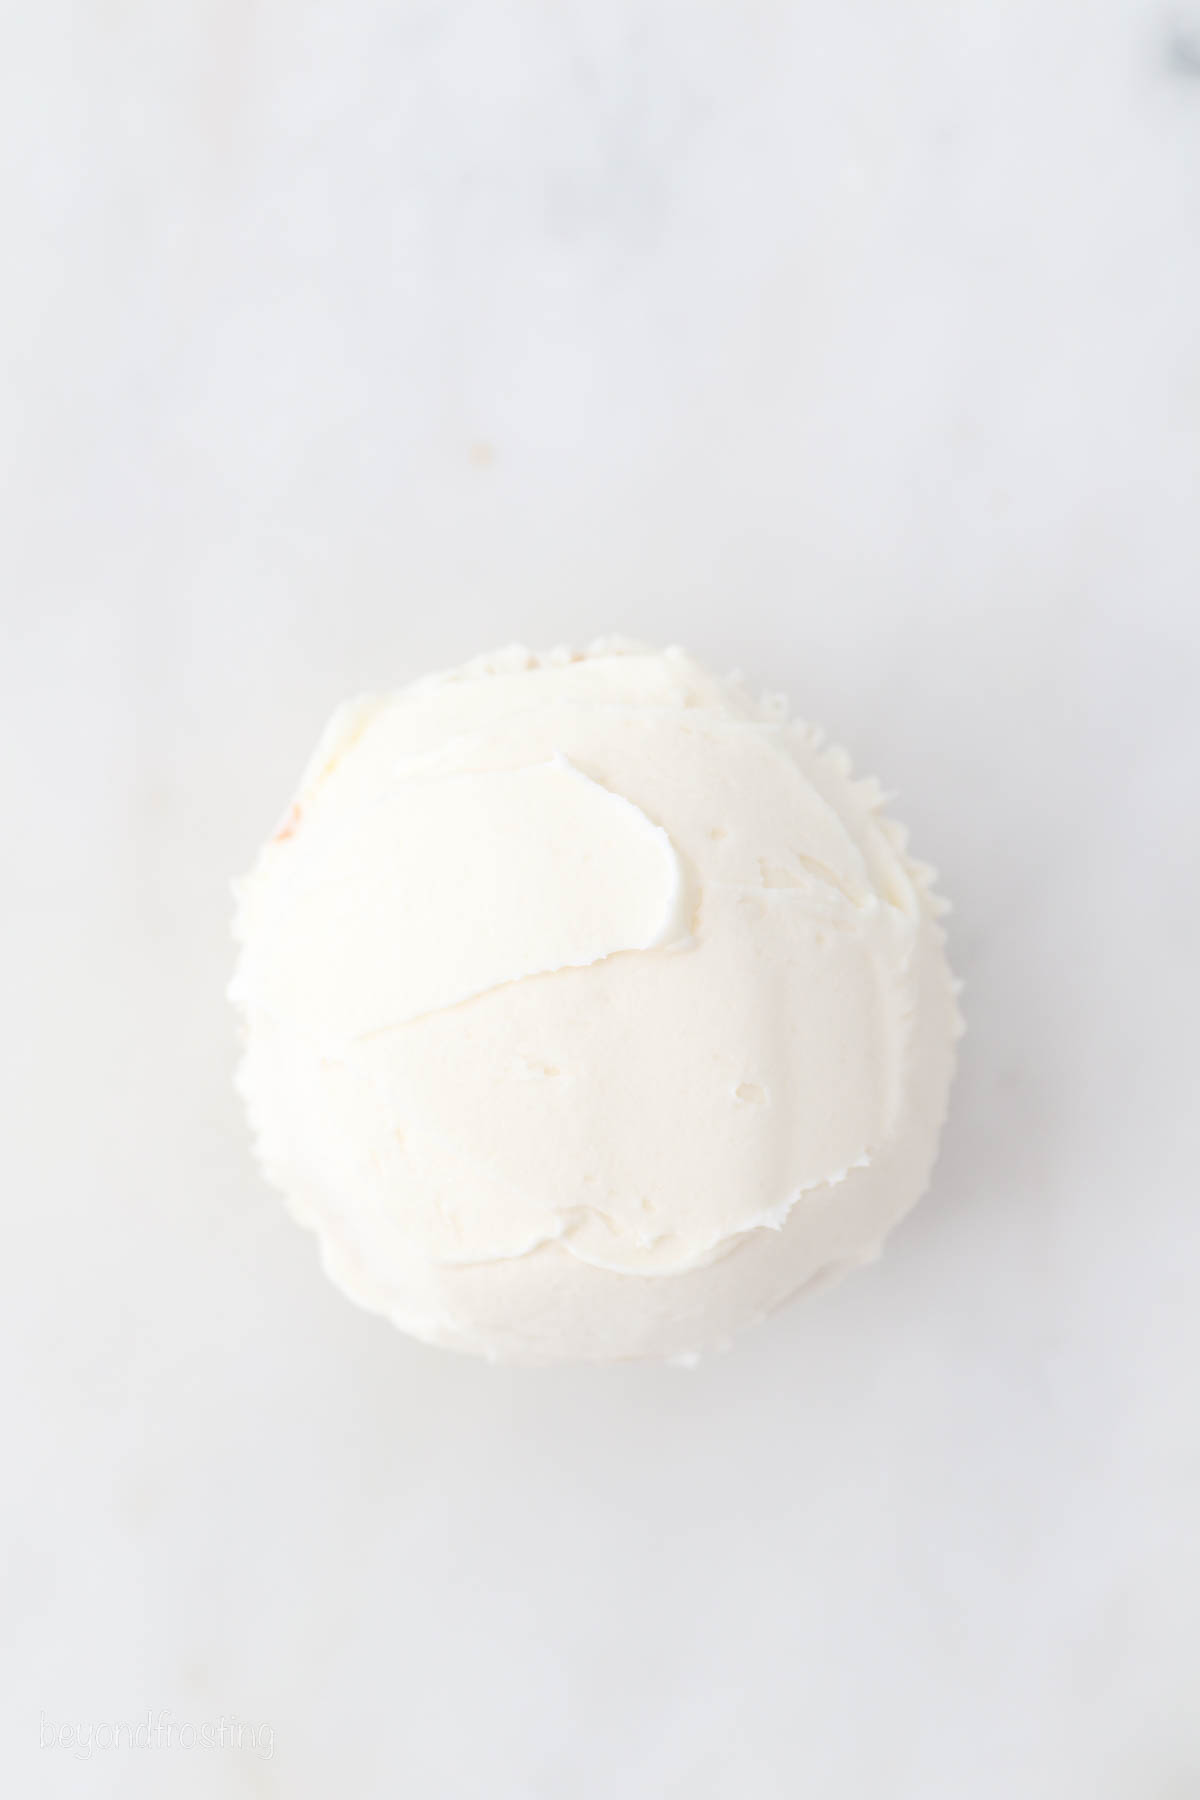 Overhead view of a cupcake frosted with white buttercream frosting.